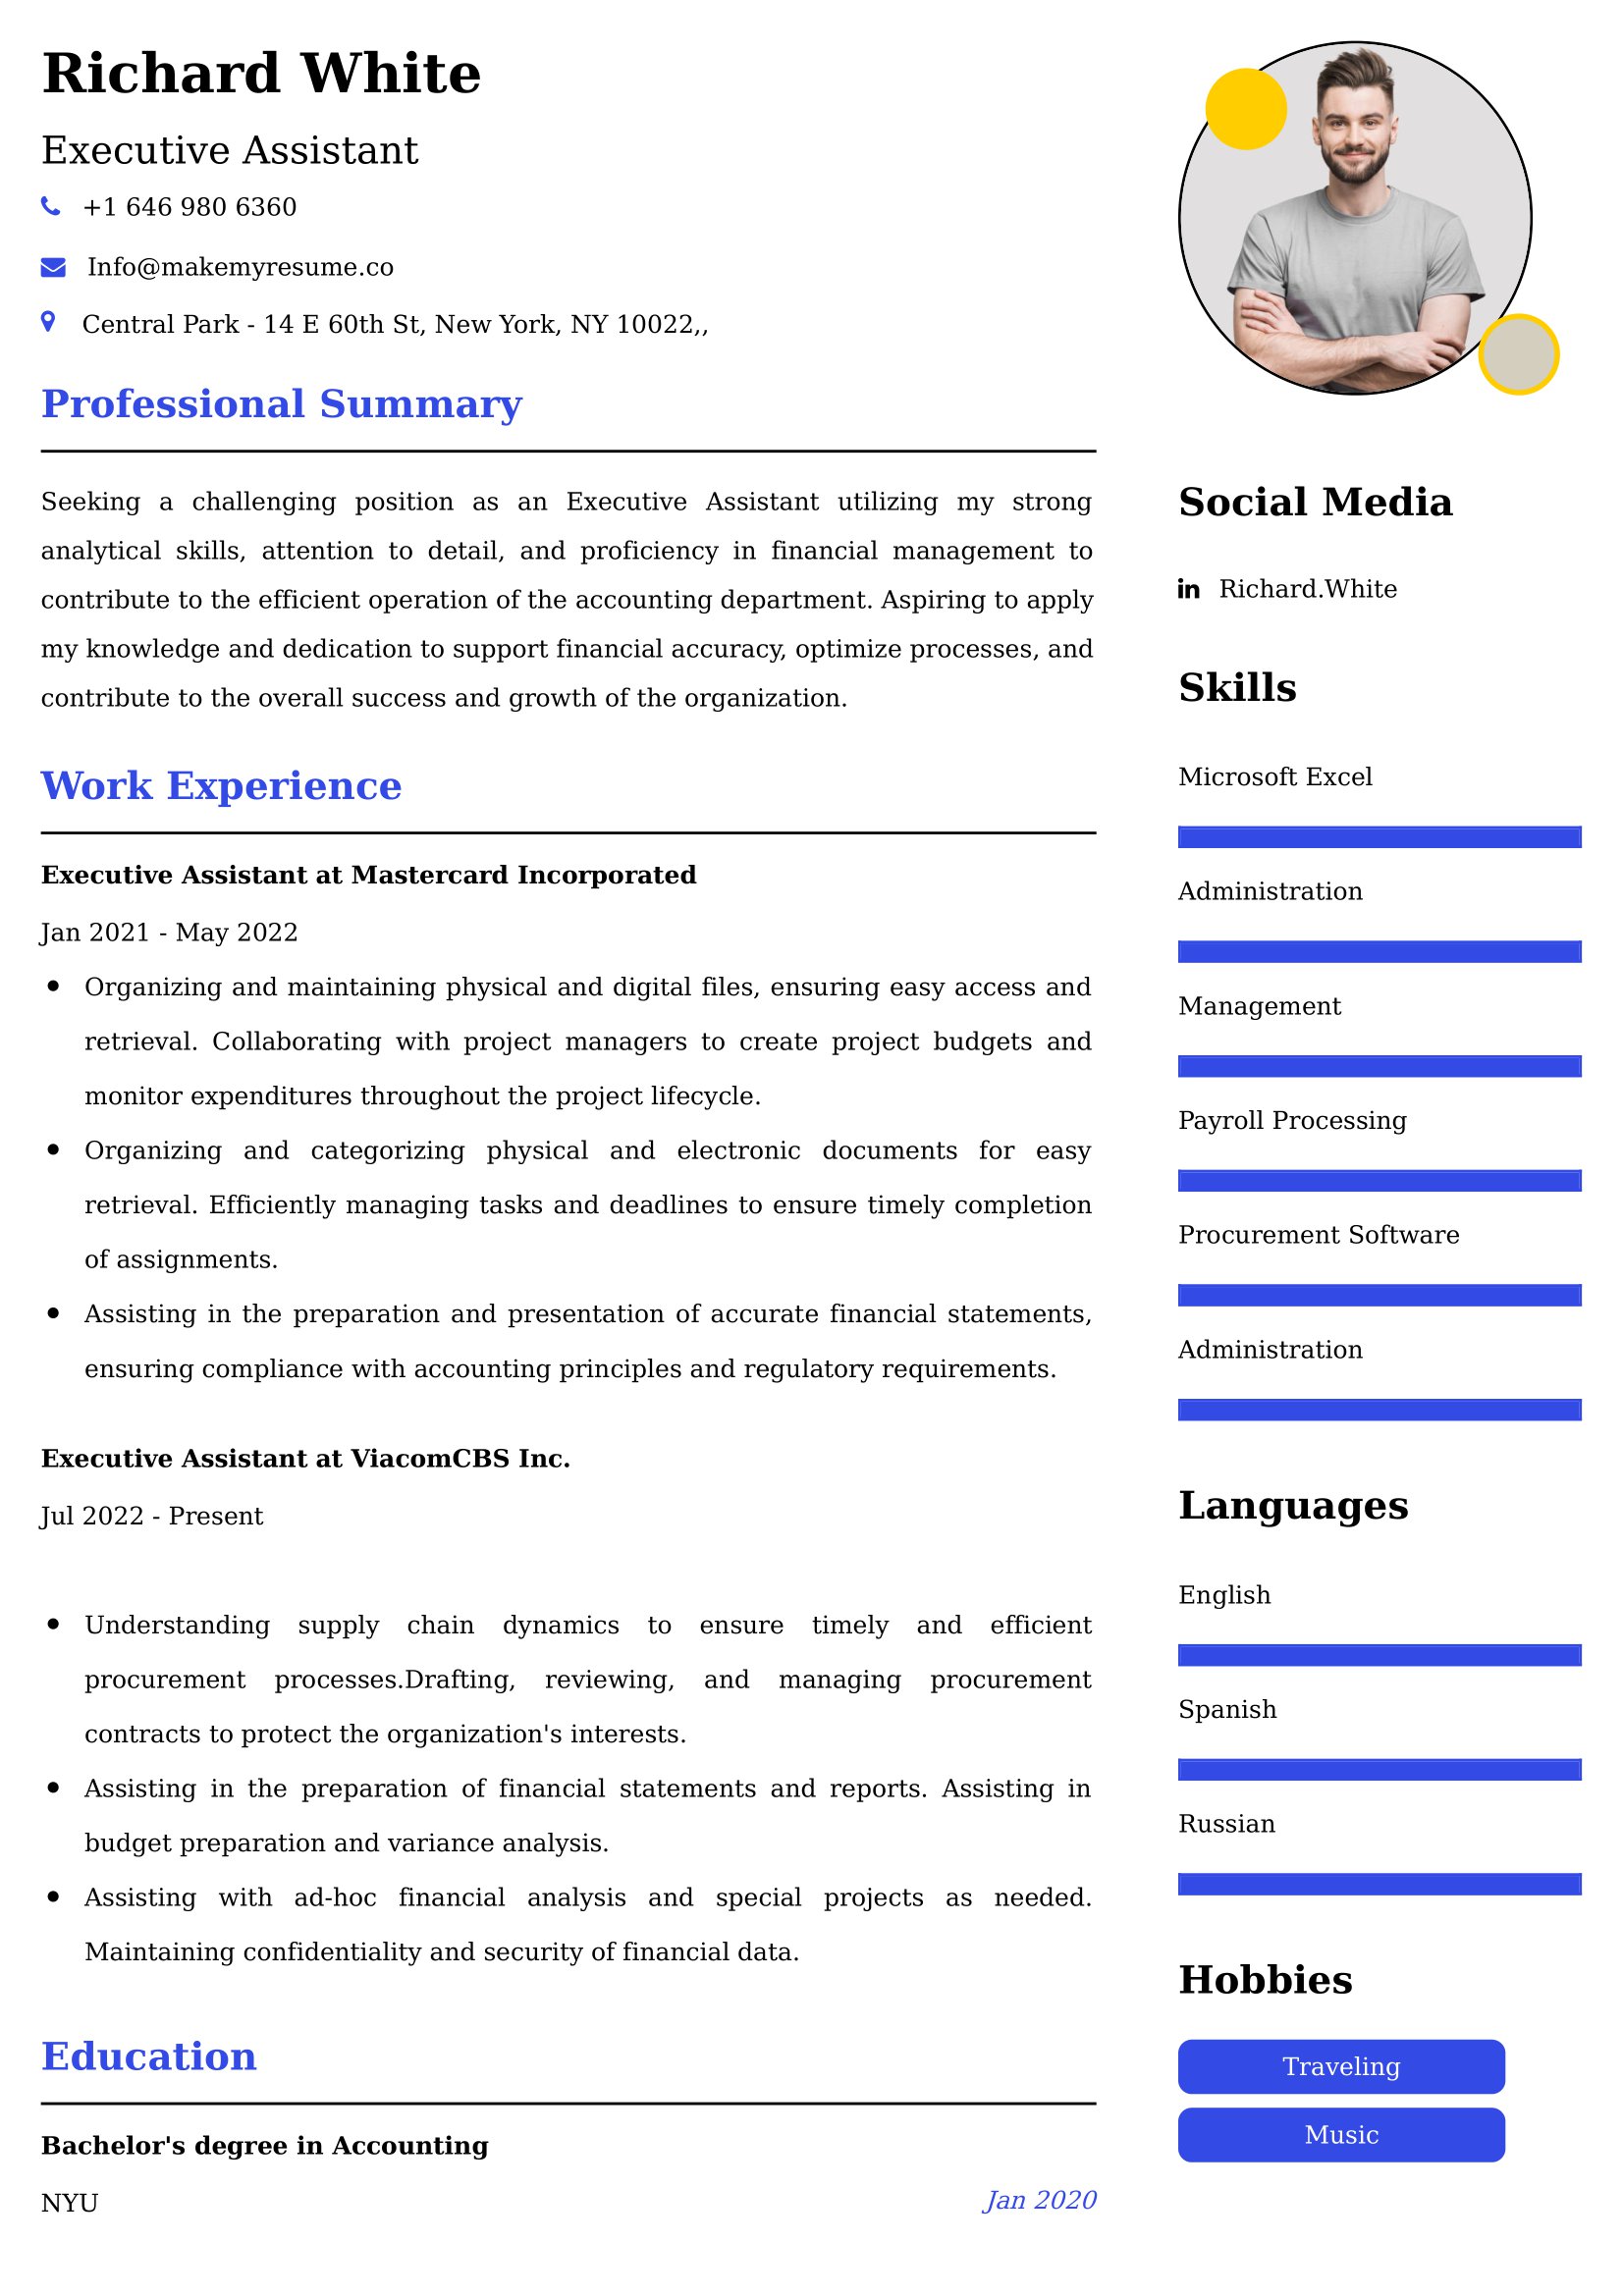 Executive Assistant Resume Examples India